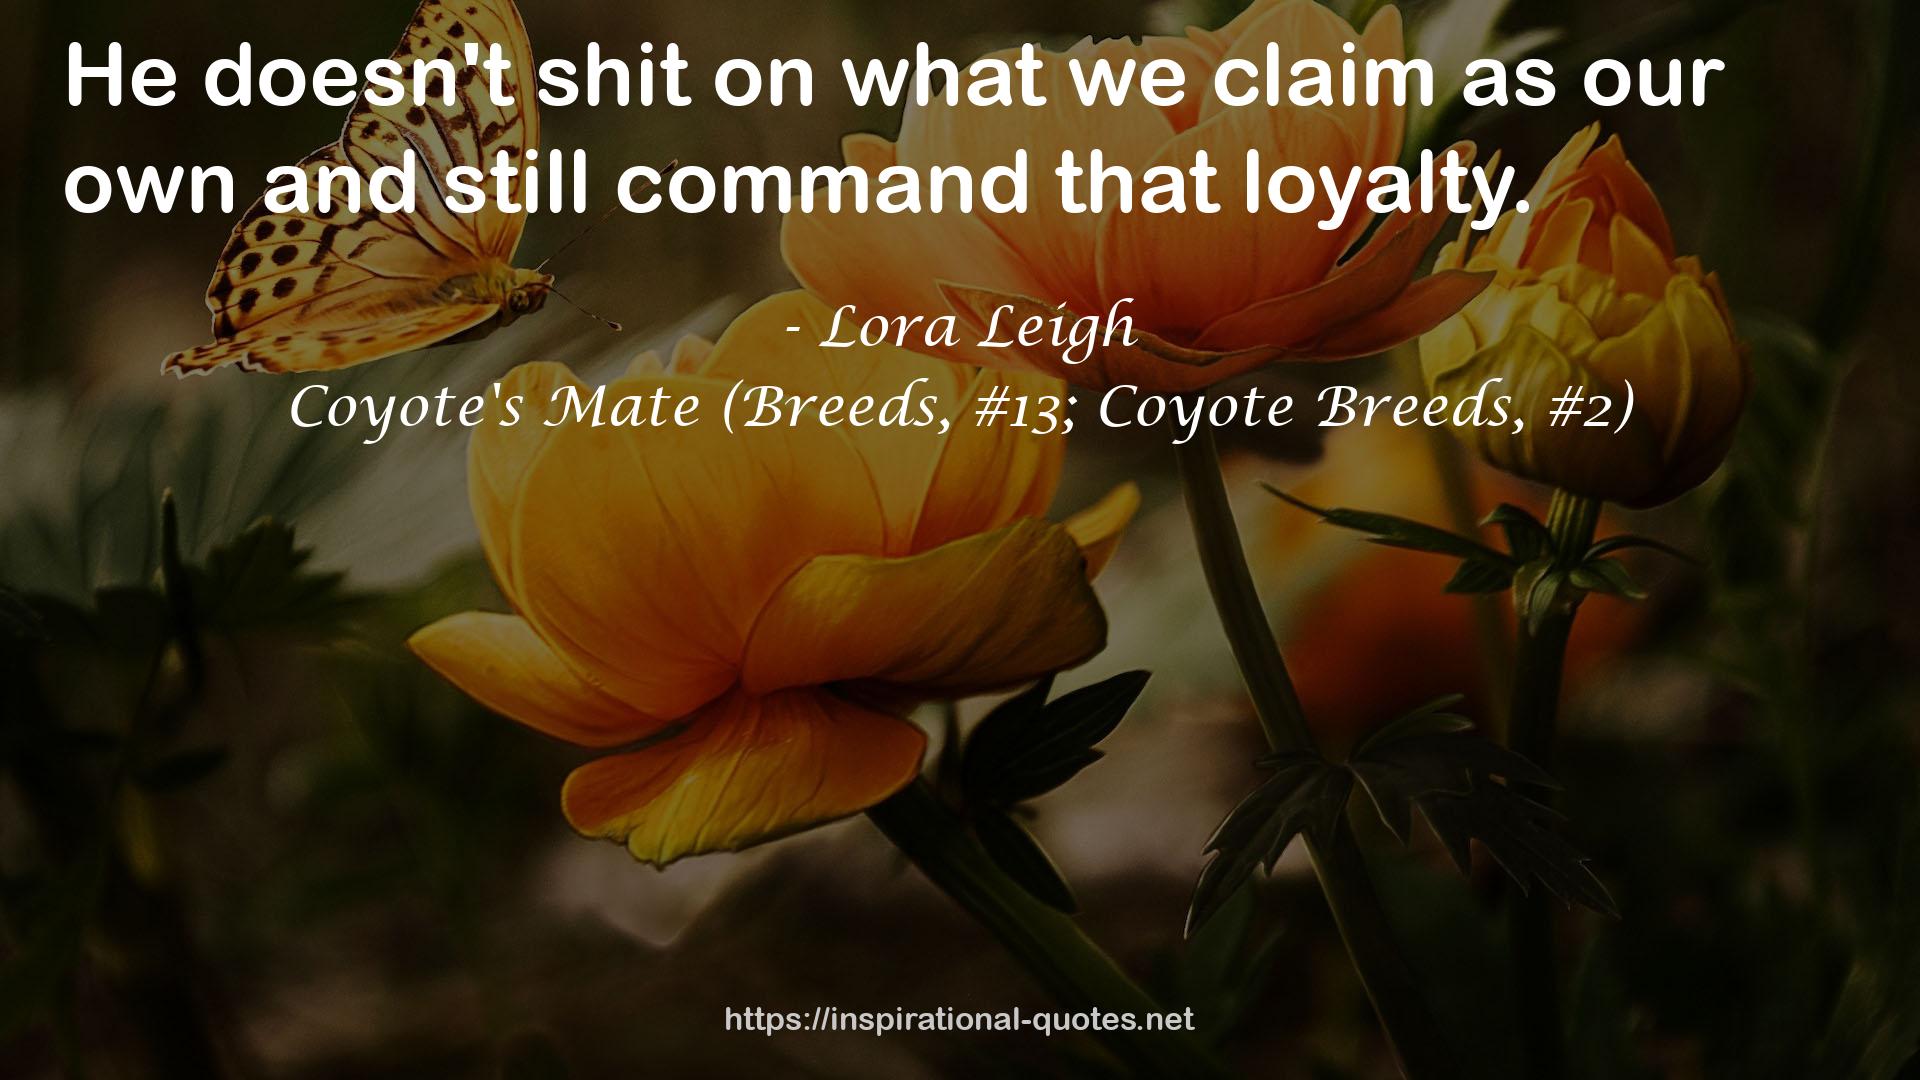 Coyote's Mate (Breeds, #13; Coyote Breeds, #2) QUOTES